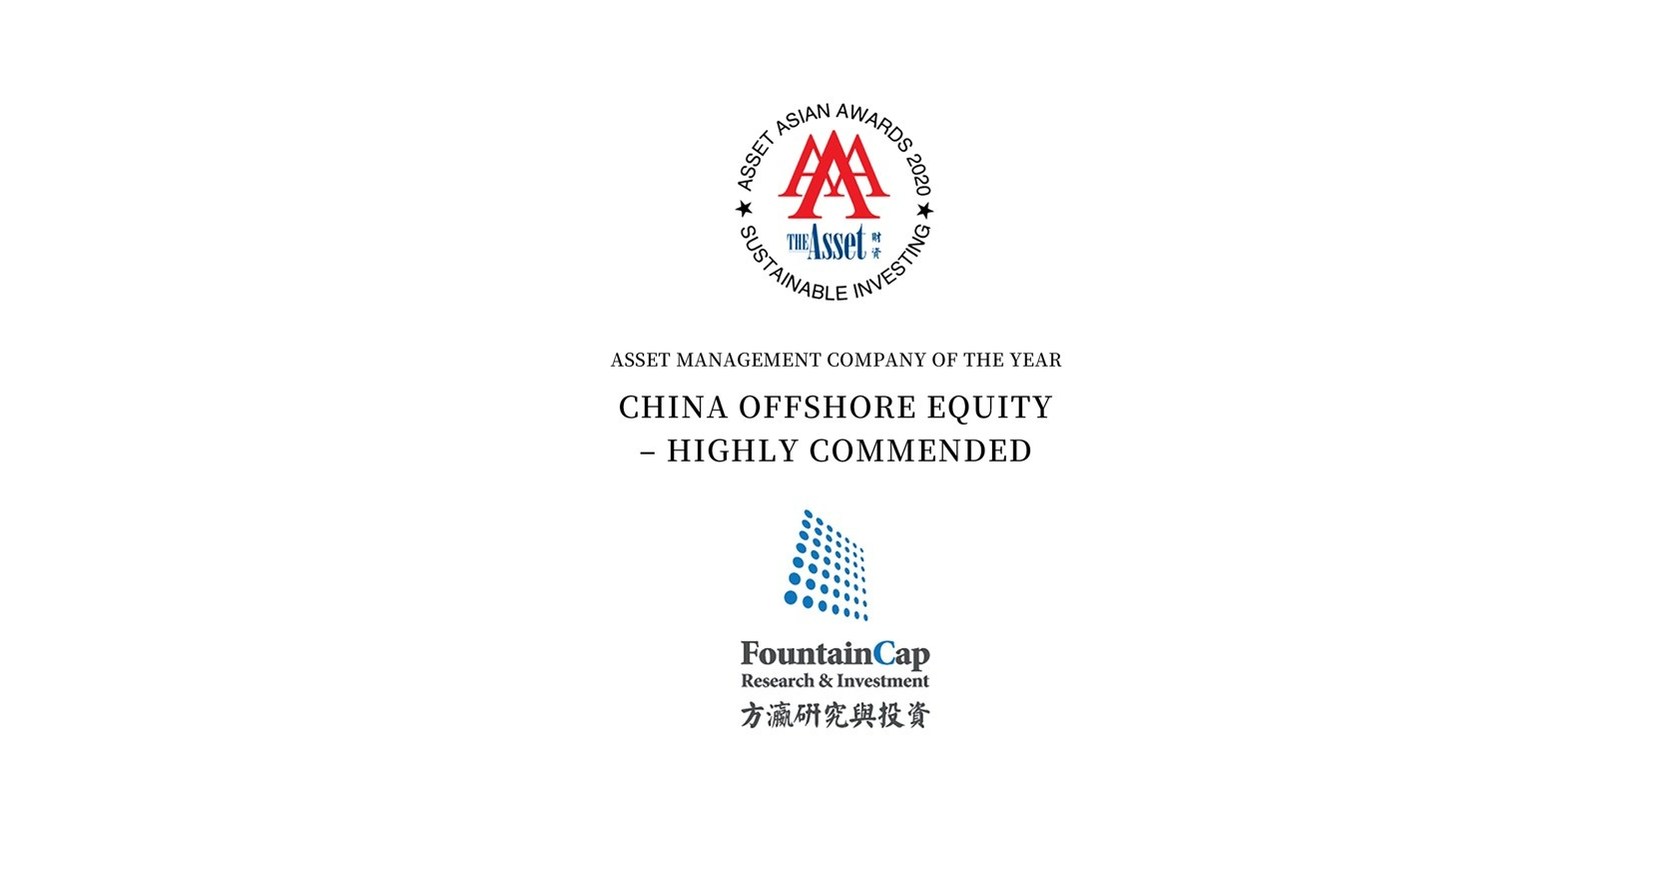 Fountaincap Wins The Asset Management Company Of The Year Award For The Third Consecutive Year